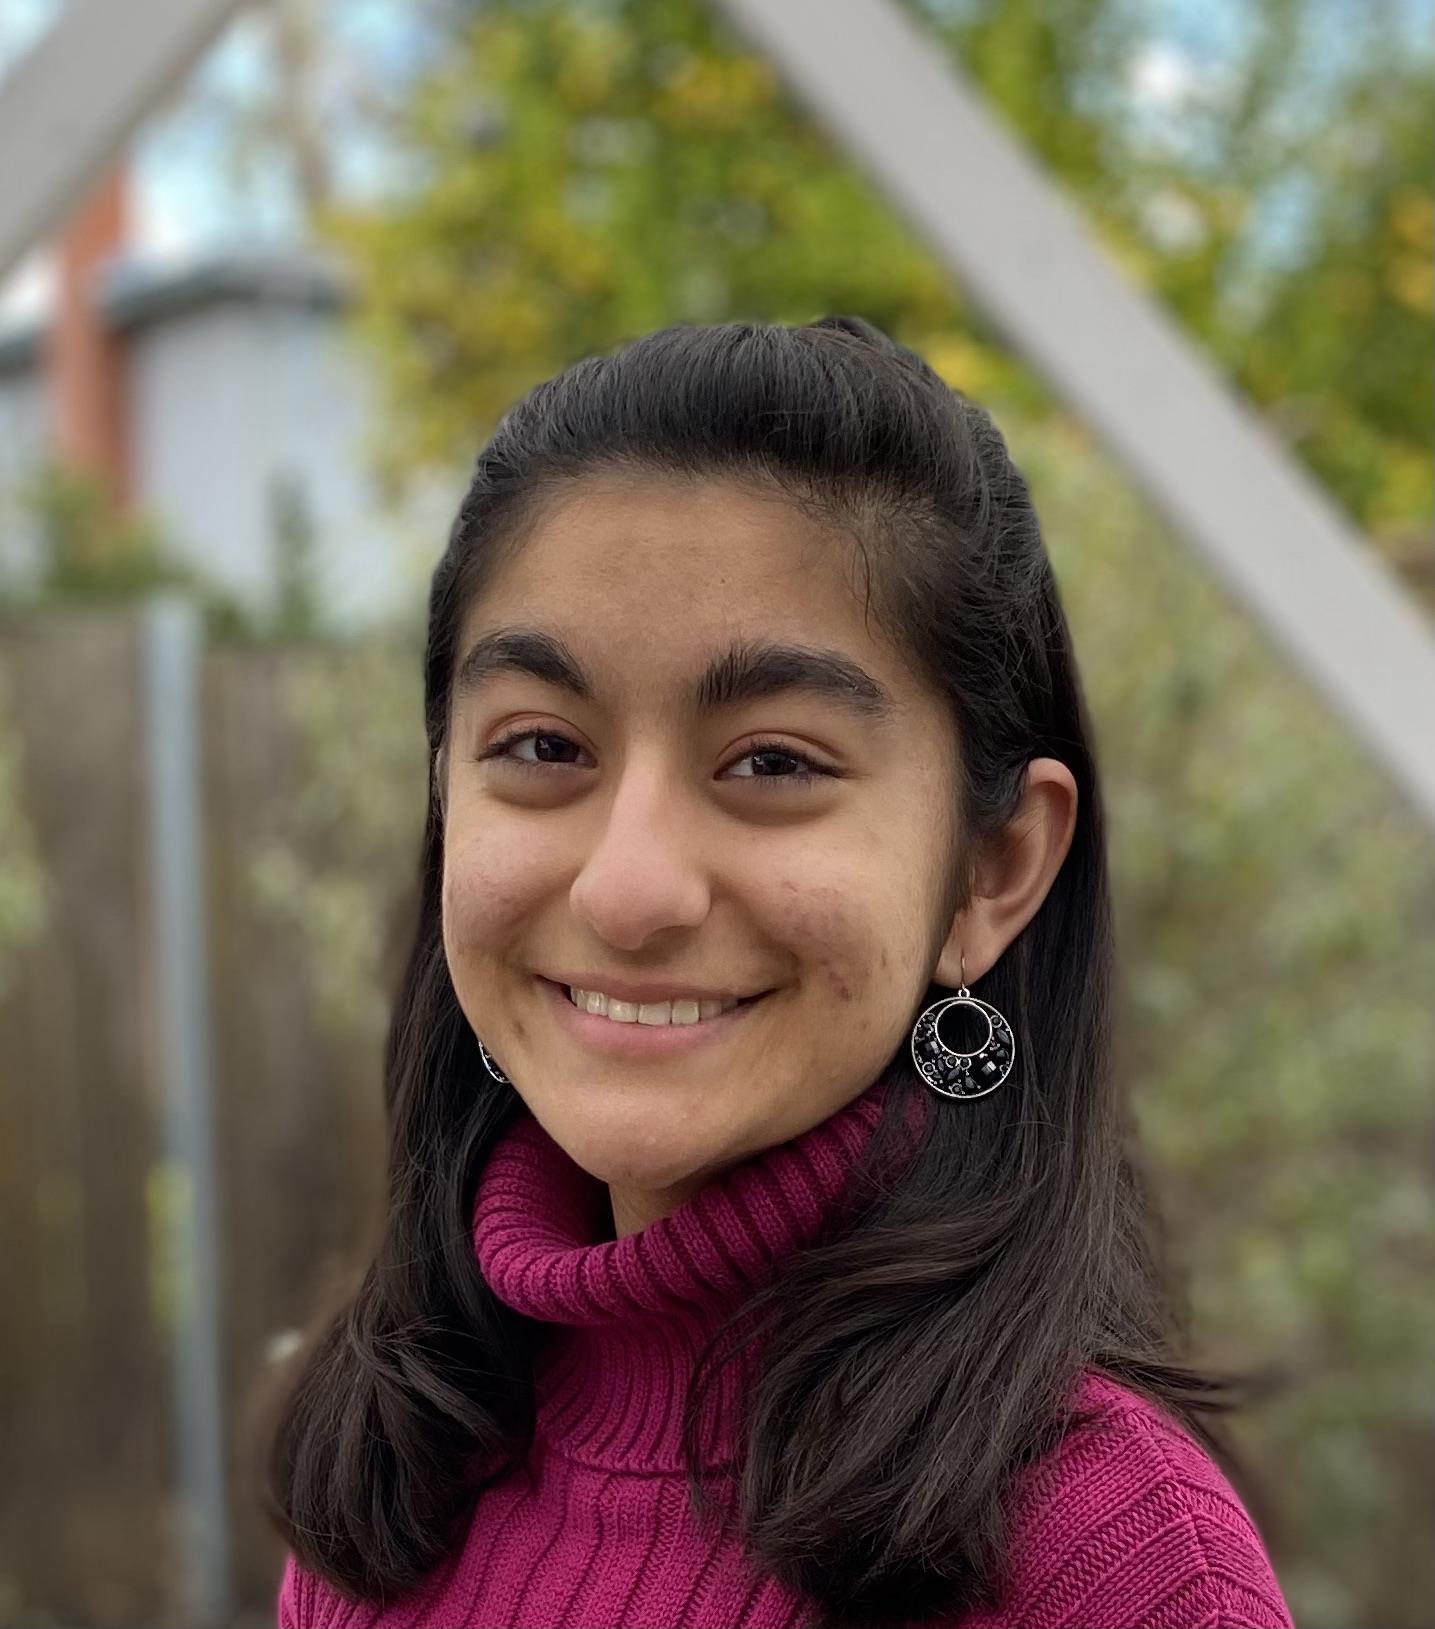 2021-22 Cutler-Bell Student Winner Hiya Shah is a young woman with long, straight black hair in a half-up hairstyle. She has medium brown skin and brown eyes. She wears a pink turtleneck sweater, silver hoop earrings and is smiling at the camera.